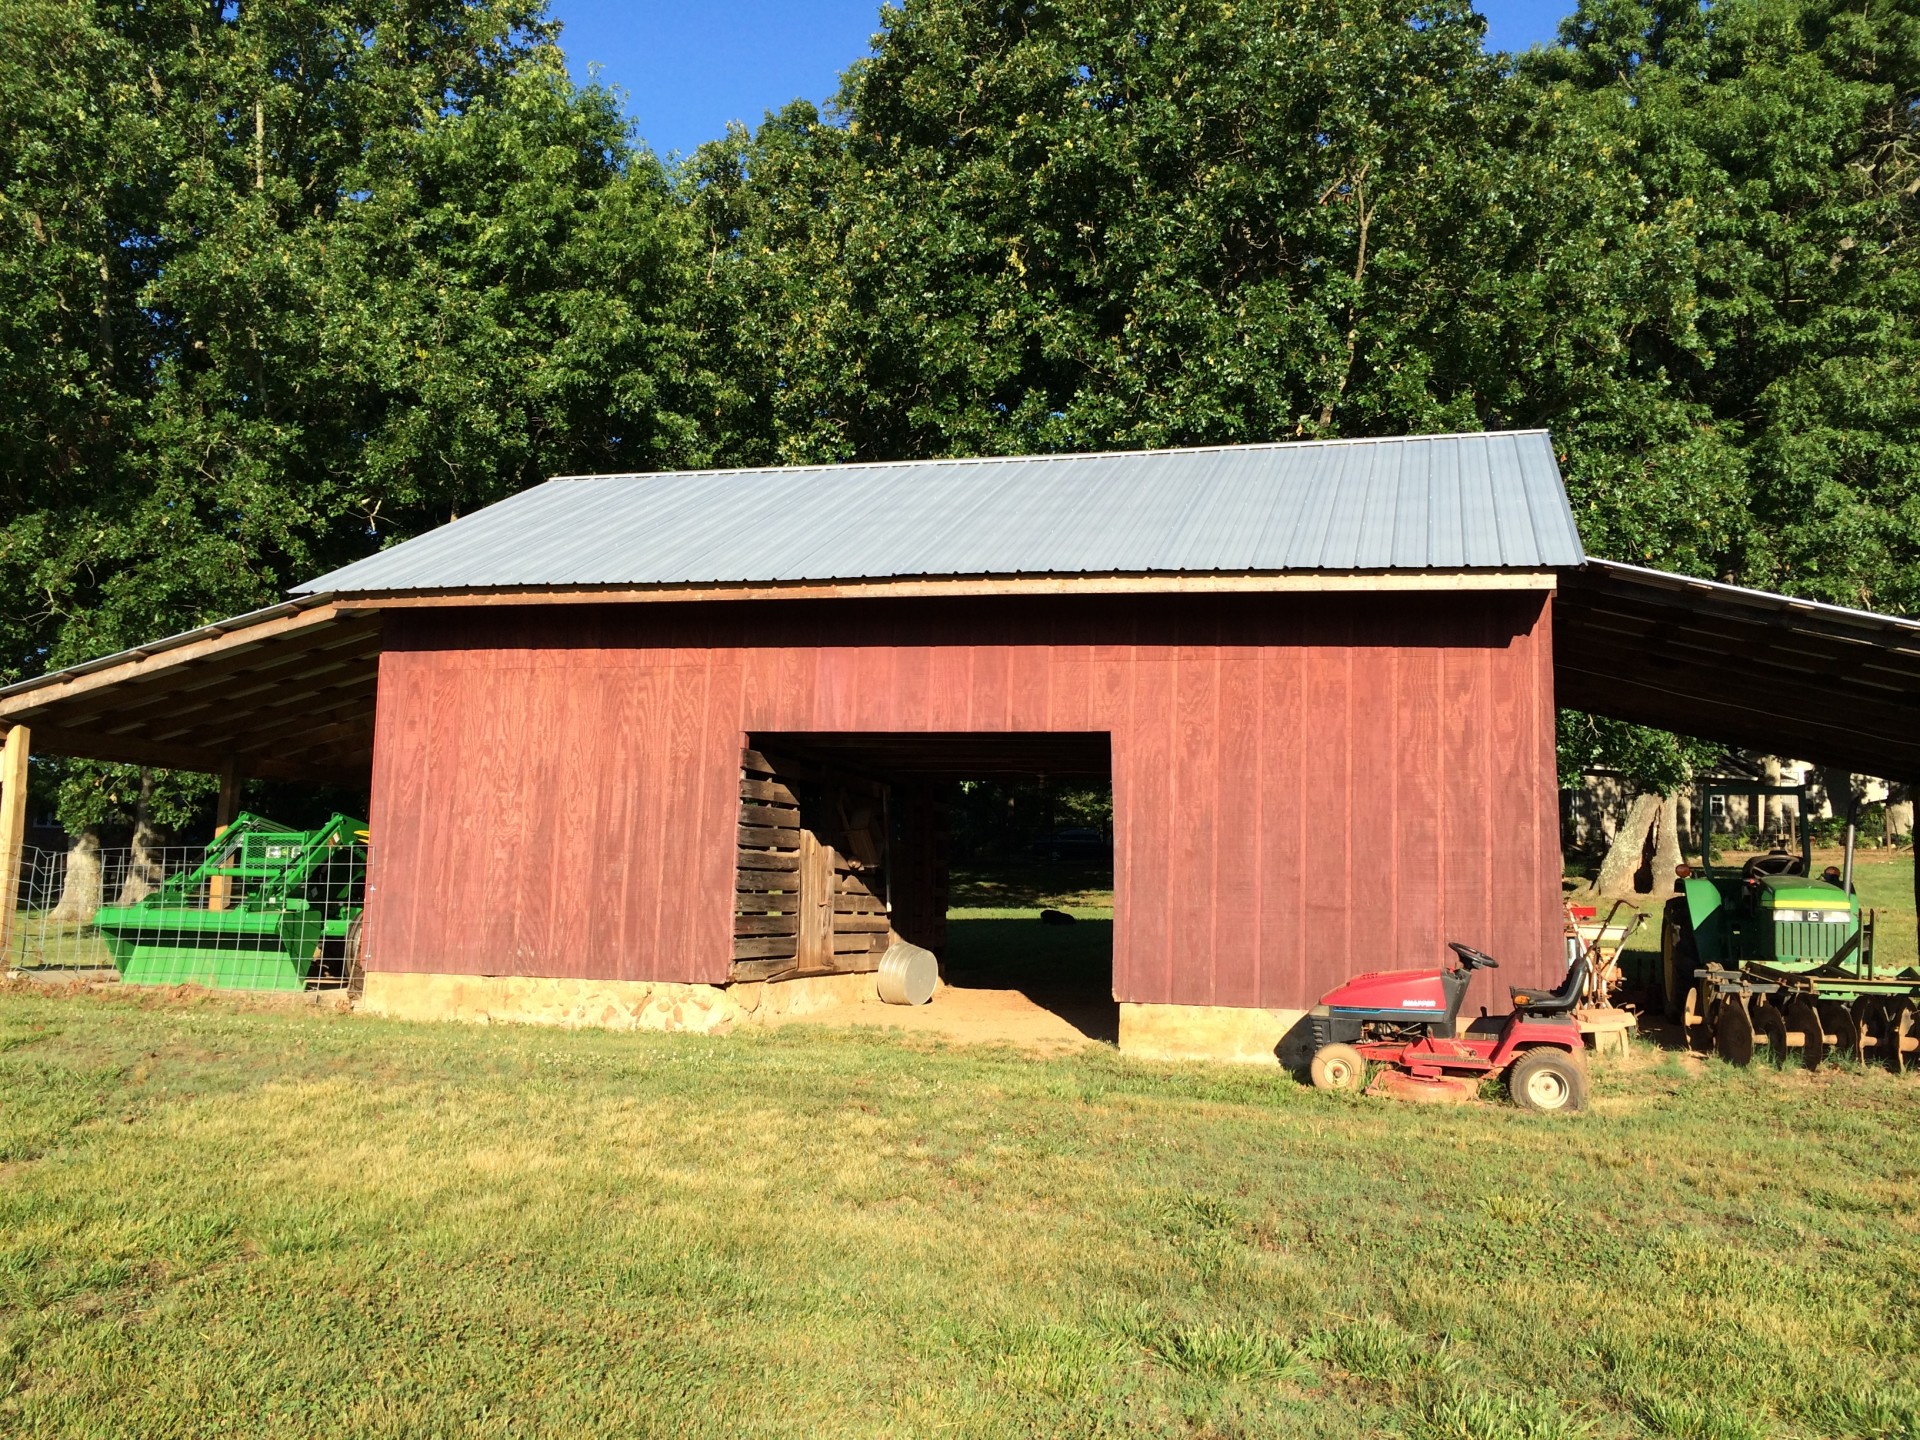 Photo of the barn with farming equipment on my Aunt's farm